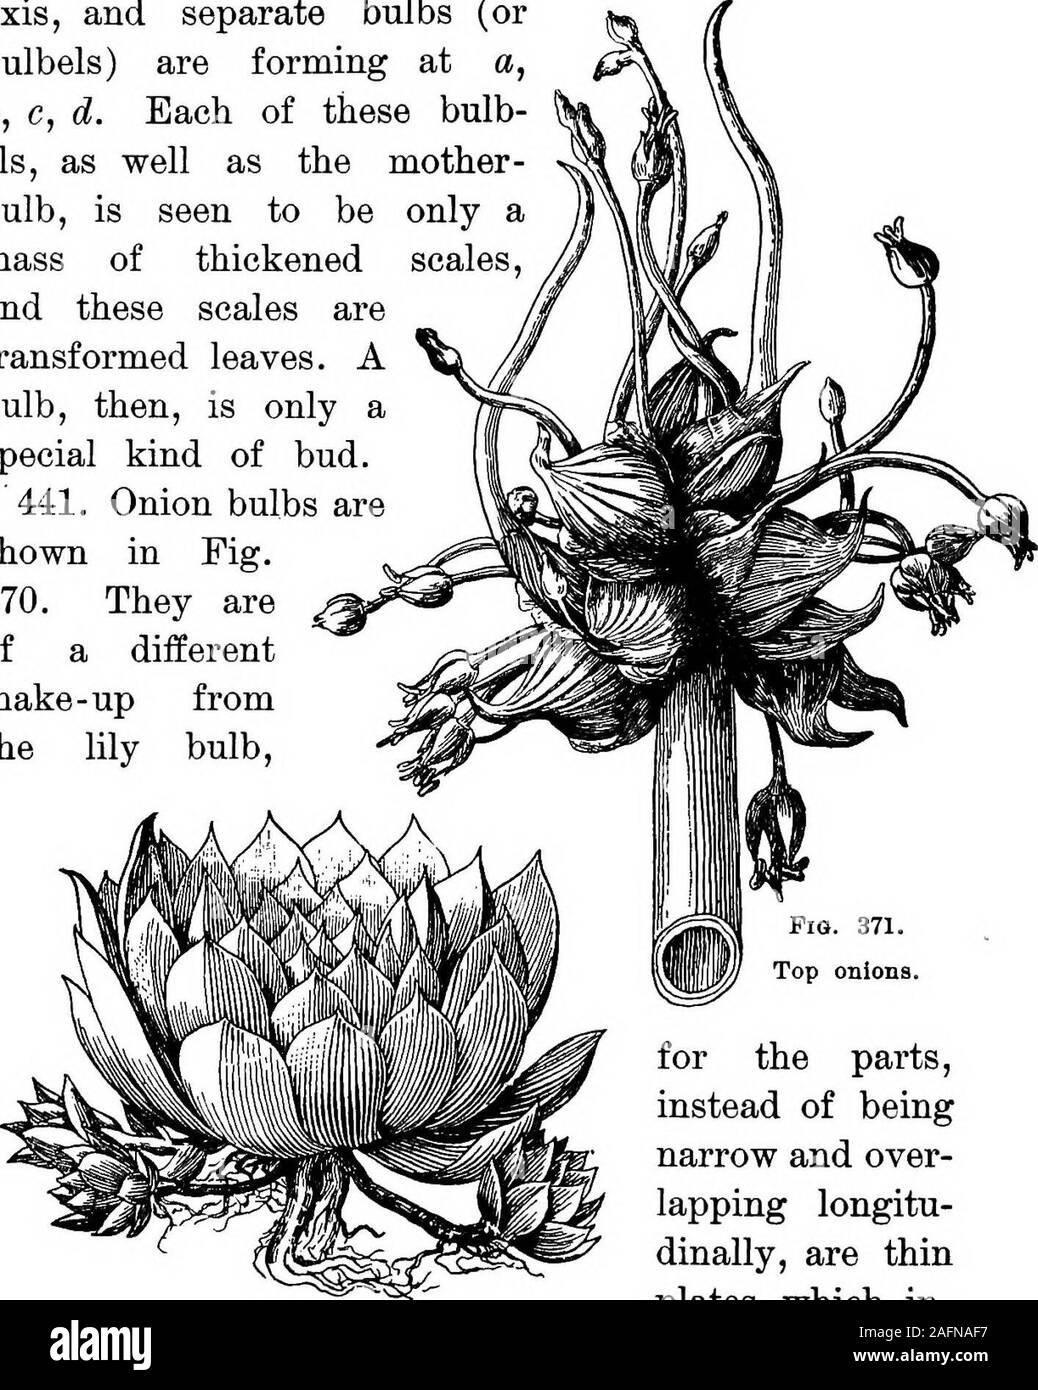 . Lessons with plants. Suggestions for seeing and interpreting some of the common forms of vegetation. Pig. 370.Onion bulbs. 354 LUSSOlfS WITH PLANTS axis, and separate bulbs (orbulbels) are forming at ab, c, d. Each of these bulb-els, as well as the mother-bulb, is seen to be only amass of thickened scales,and these scales aretransformed leaves. Abulb, then, is only aspecial kind of bud.441. Onion bulbs areshown in Fig.370. They areof a differentmake-up fromthe lily bulb.. Pig. 372.Bosette and offsets of house-leek. Fig. 371.Top onions. for the parts,instead of beingnarrow and over-lapping lo Stock Photo